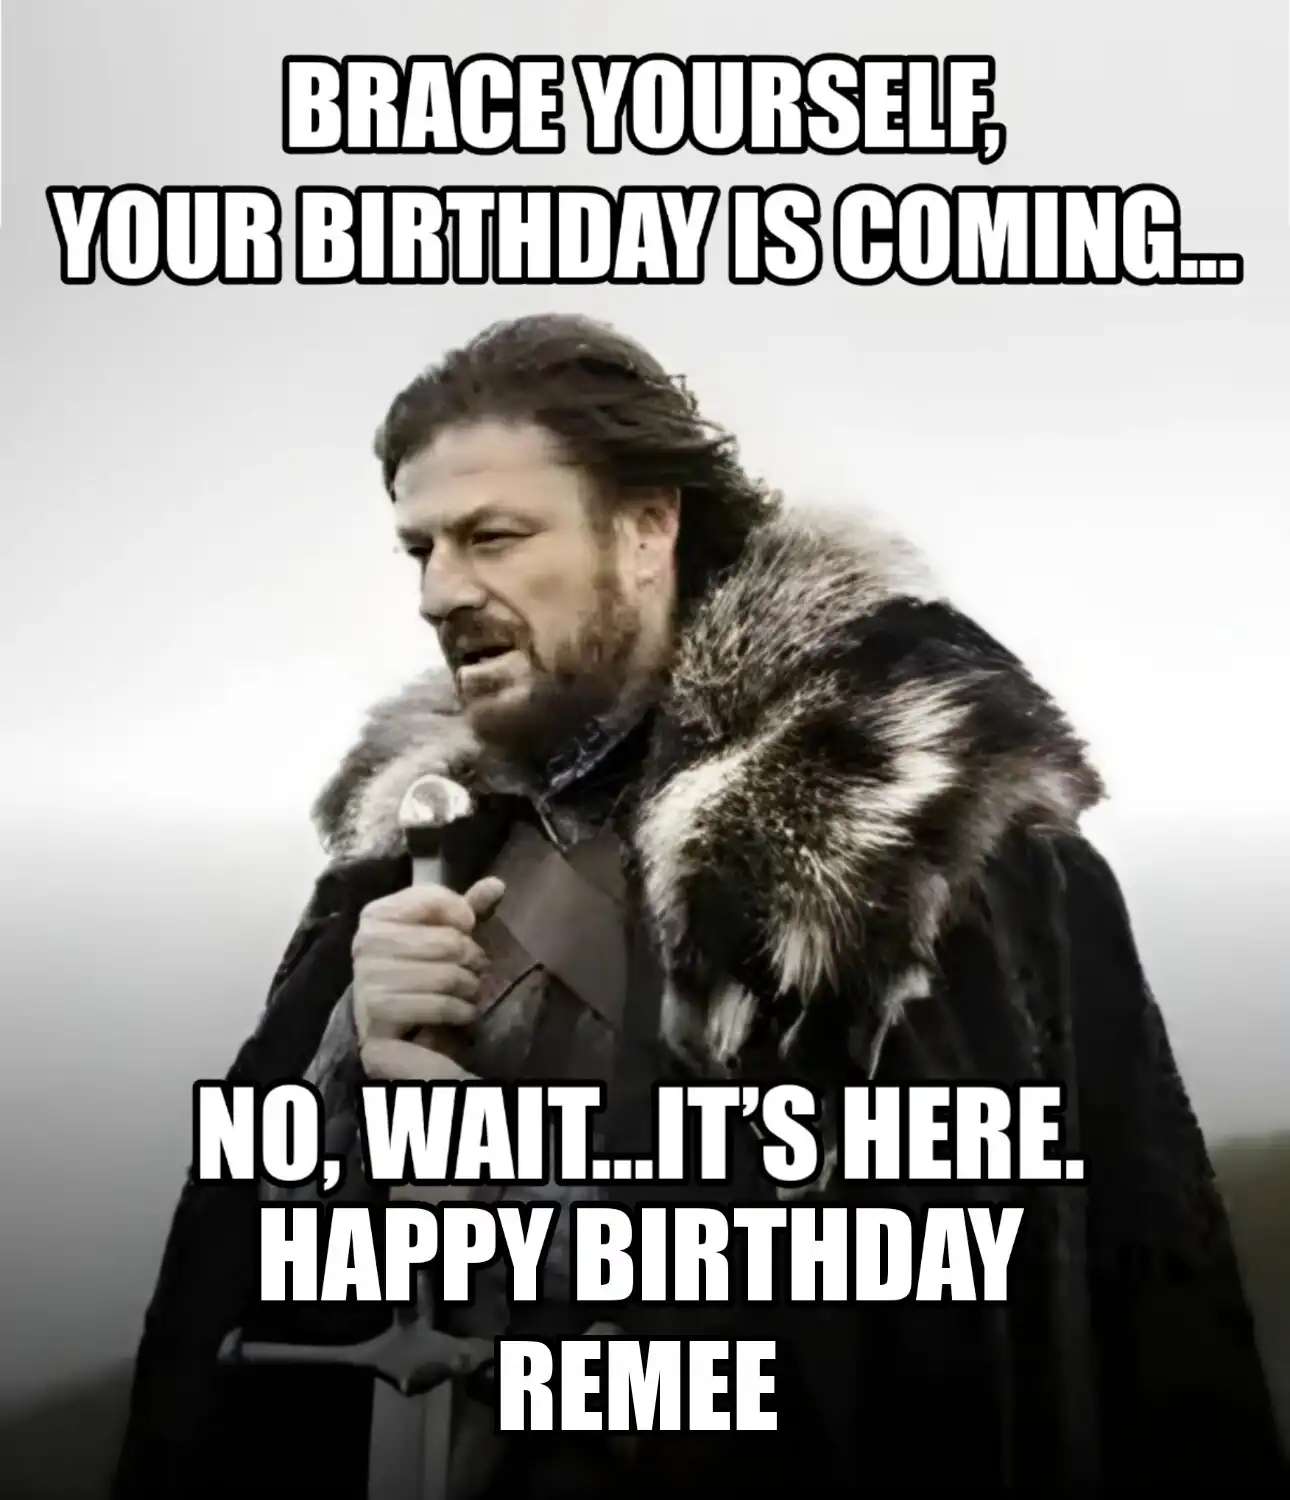 Happy Birthday Remee Brace Yourself Your Birthday Is Coming Meme